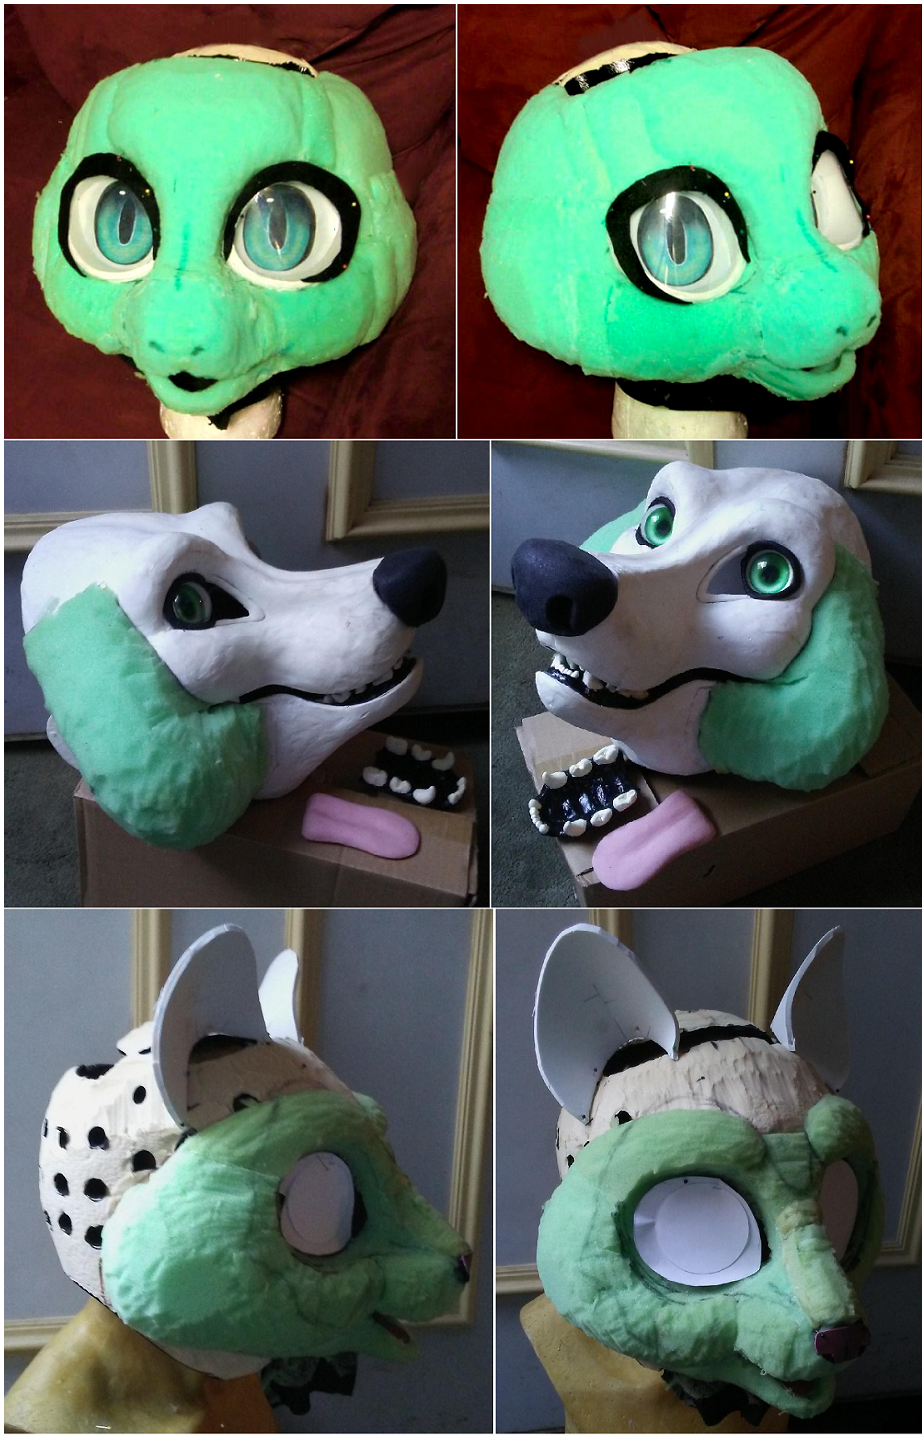 New fursuit head [Now featuring foam] by 2qe6647 -- Fur Affinity